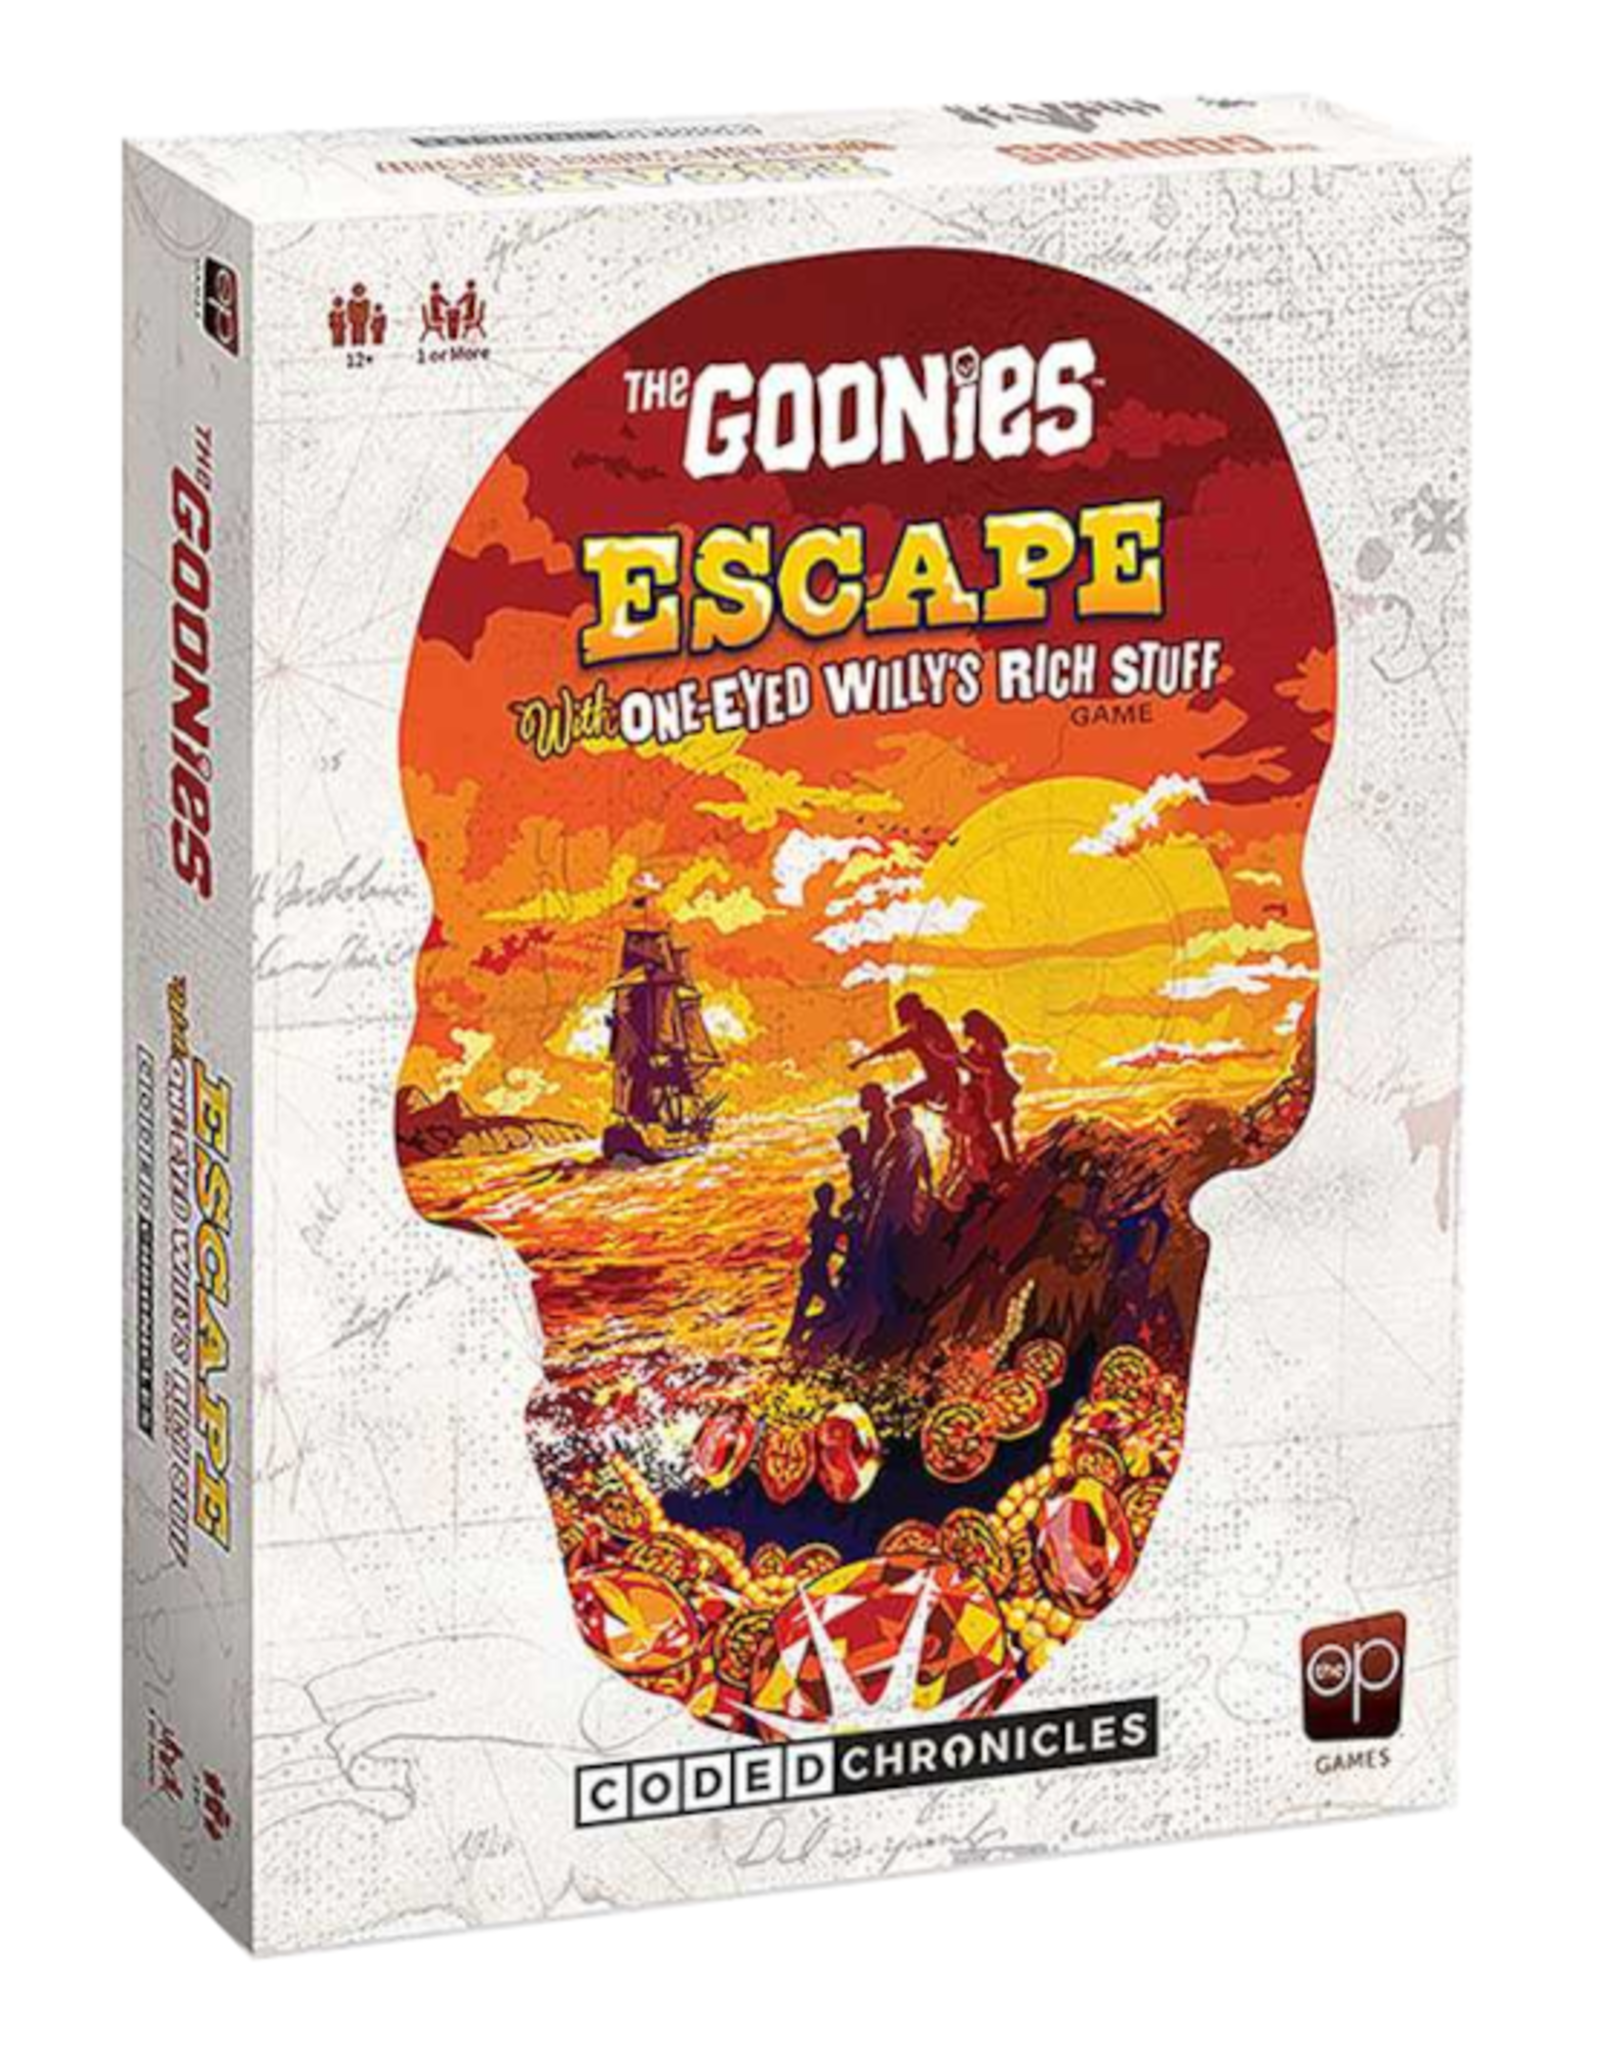 USAopoly USAopoly - Coded Chronicles: The Goonies Escape with One Eyed Willy's RIch Stuff